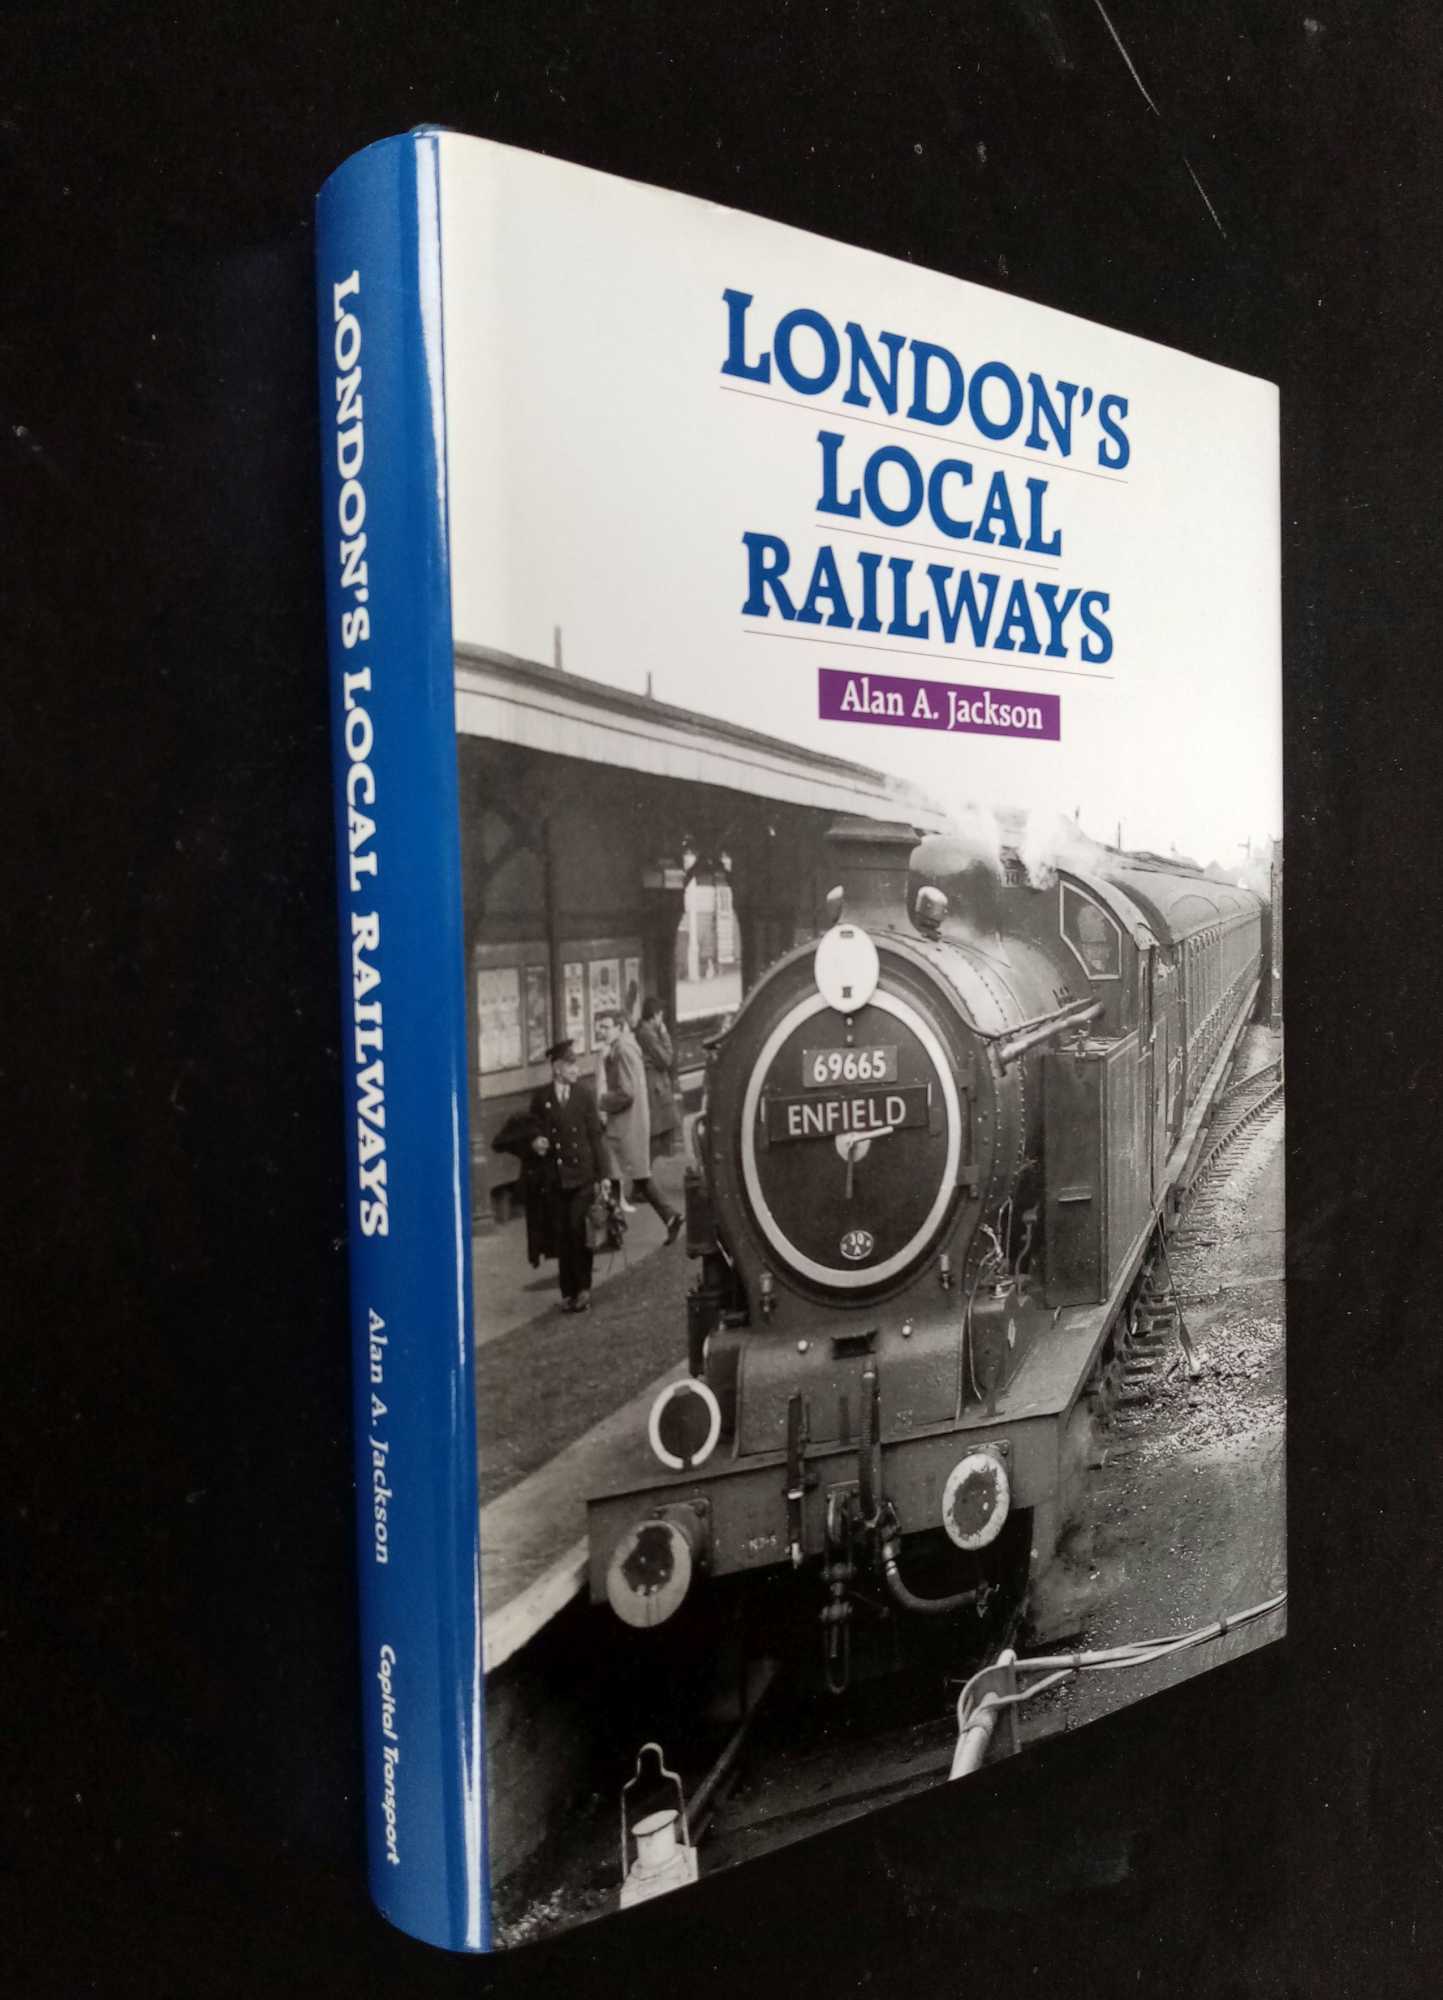 Alan Jackson - London's Local Railways     2nd Edition  Revised and Enlarged